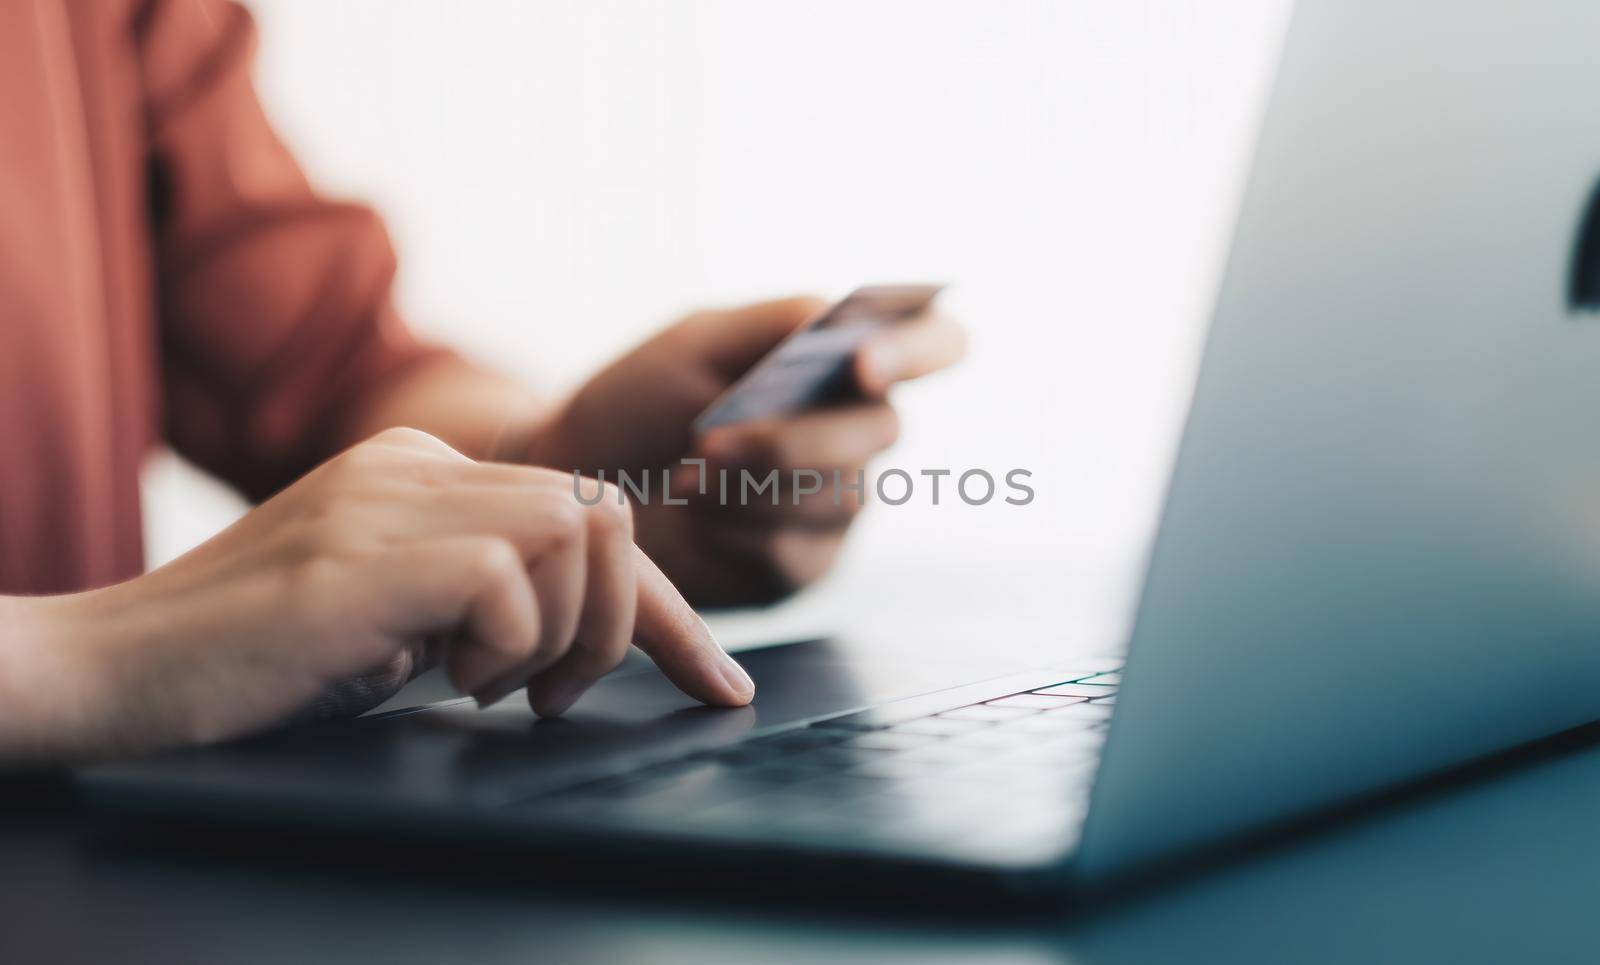 Hands holding plastic credit card and using laptop. Online shopping concept. soft focus.